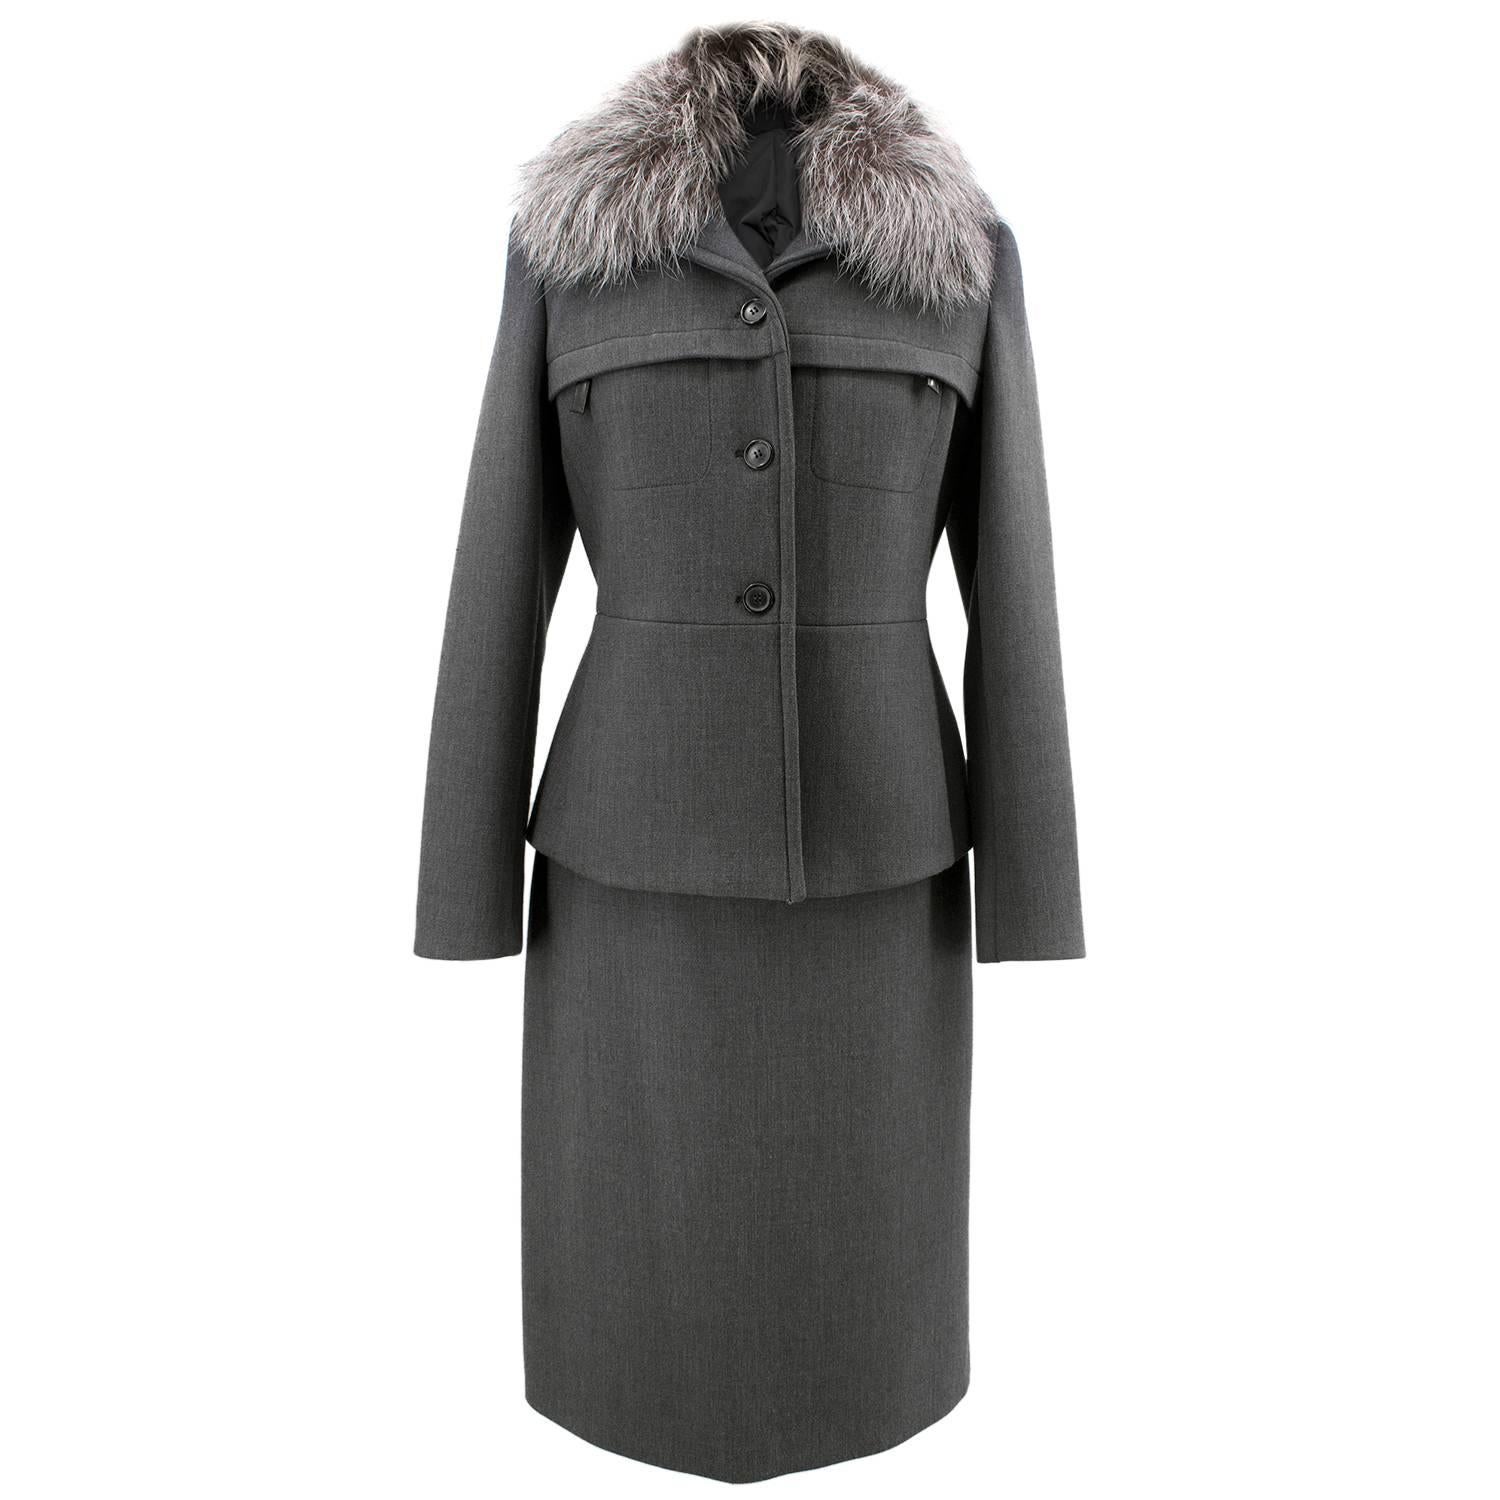 Prada Grey Suit Jacket with Fur Collar and Skirt - Size US 6  For Sale